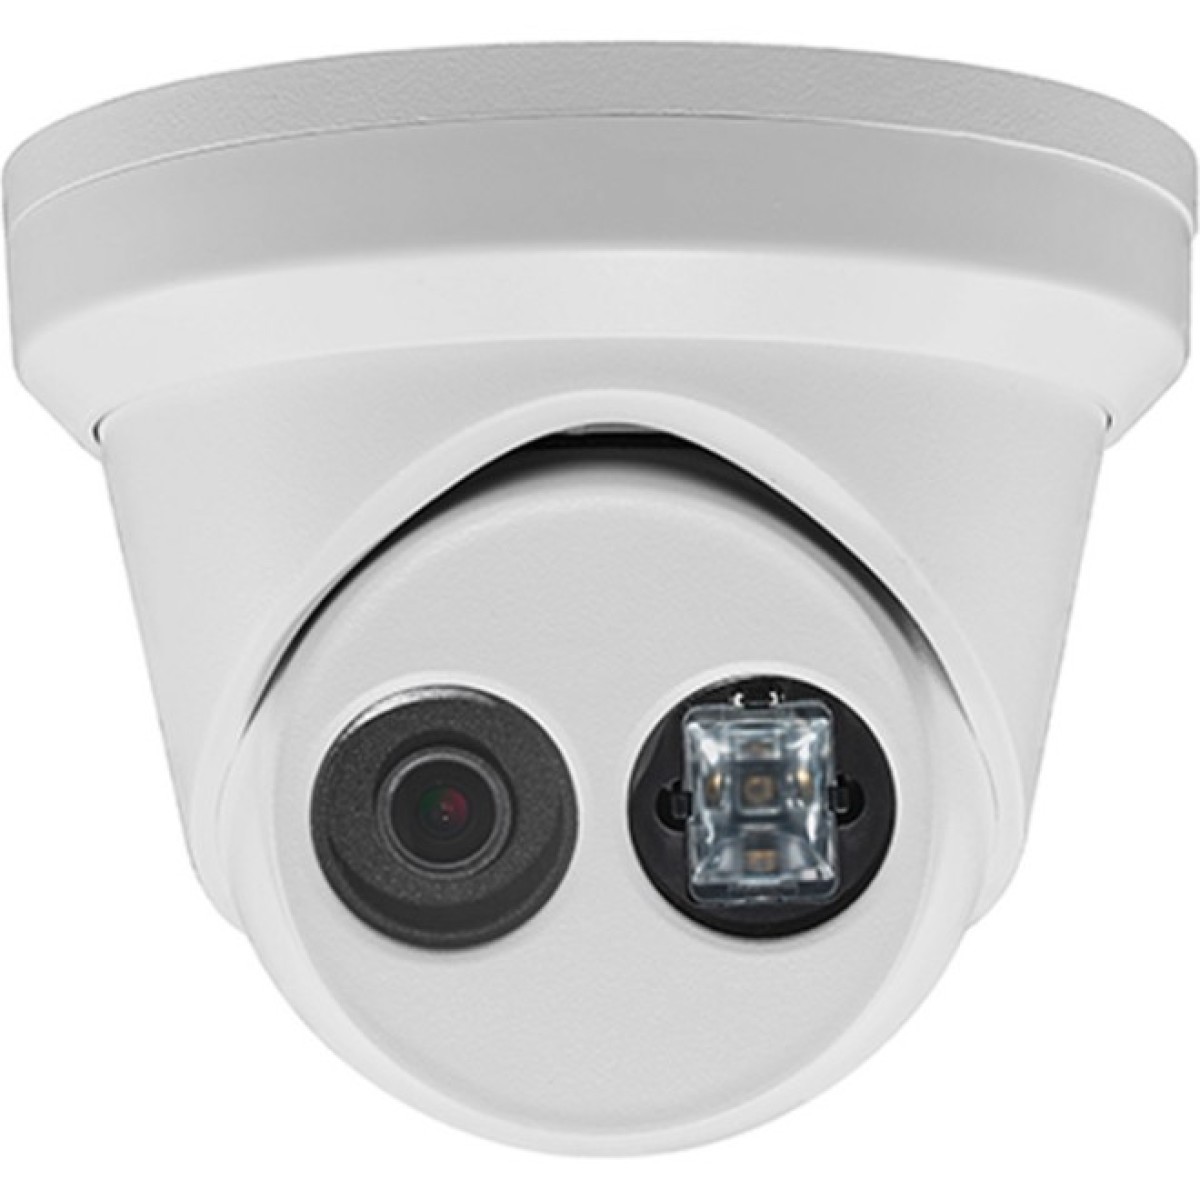 IP-камера Hikvision DS-2CD2345FWD-I (2.8) 98_98.jpg - фото 3